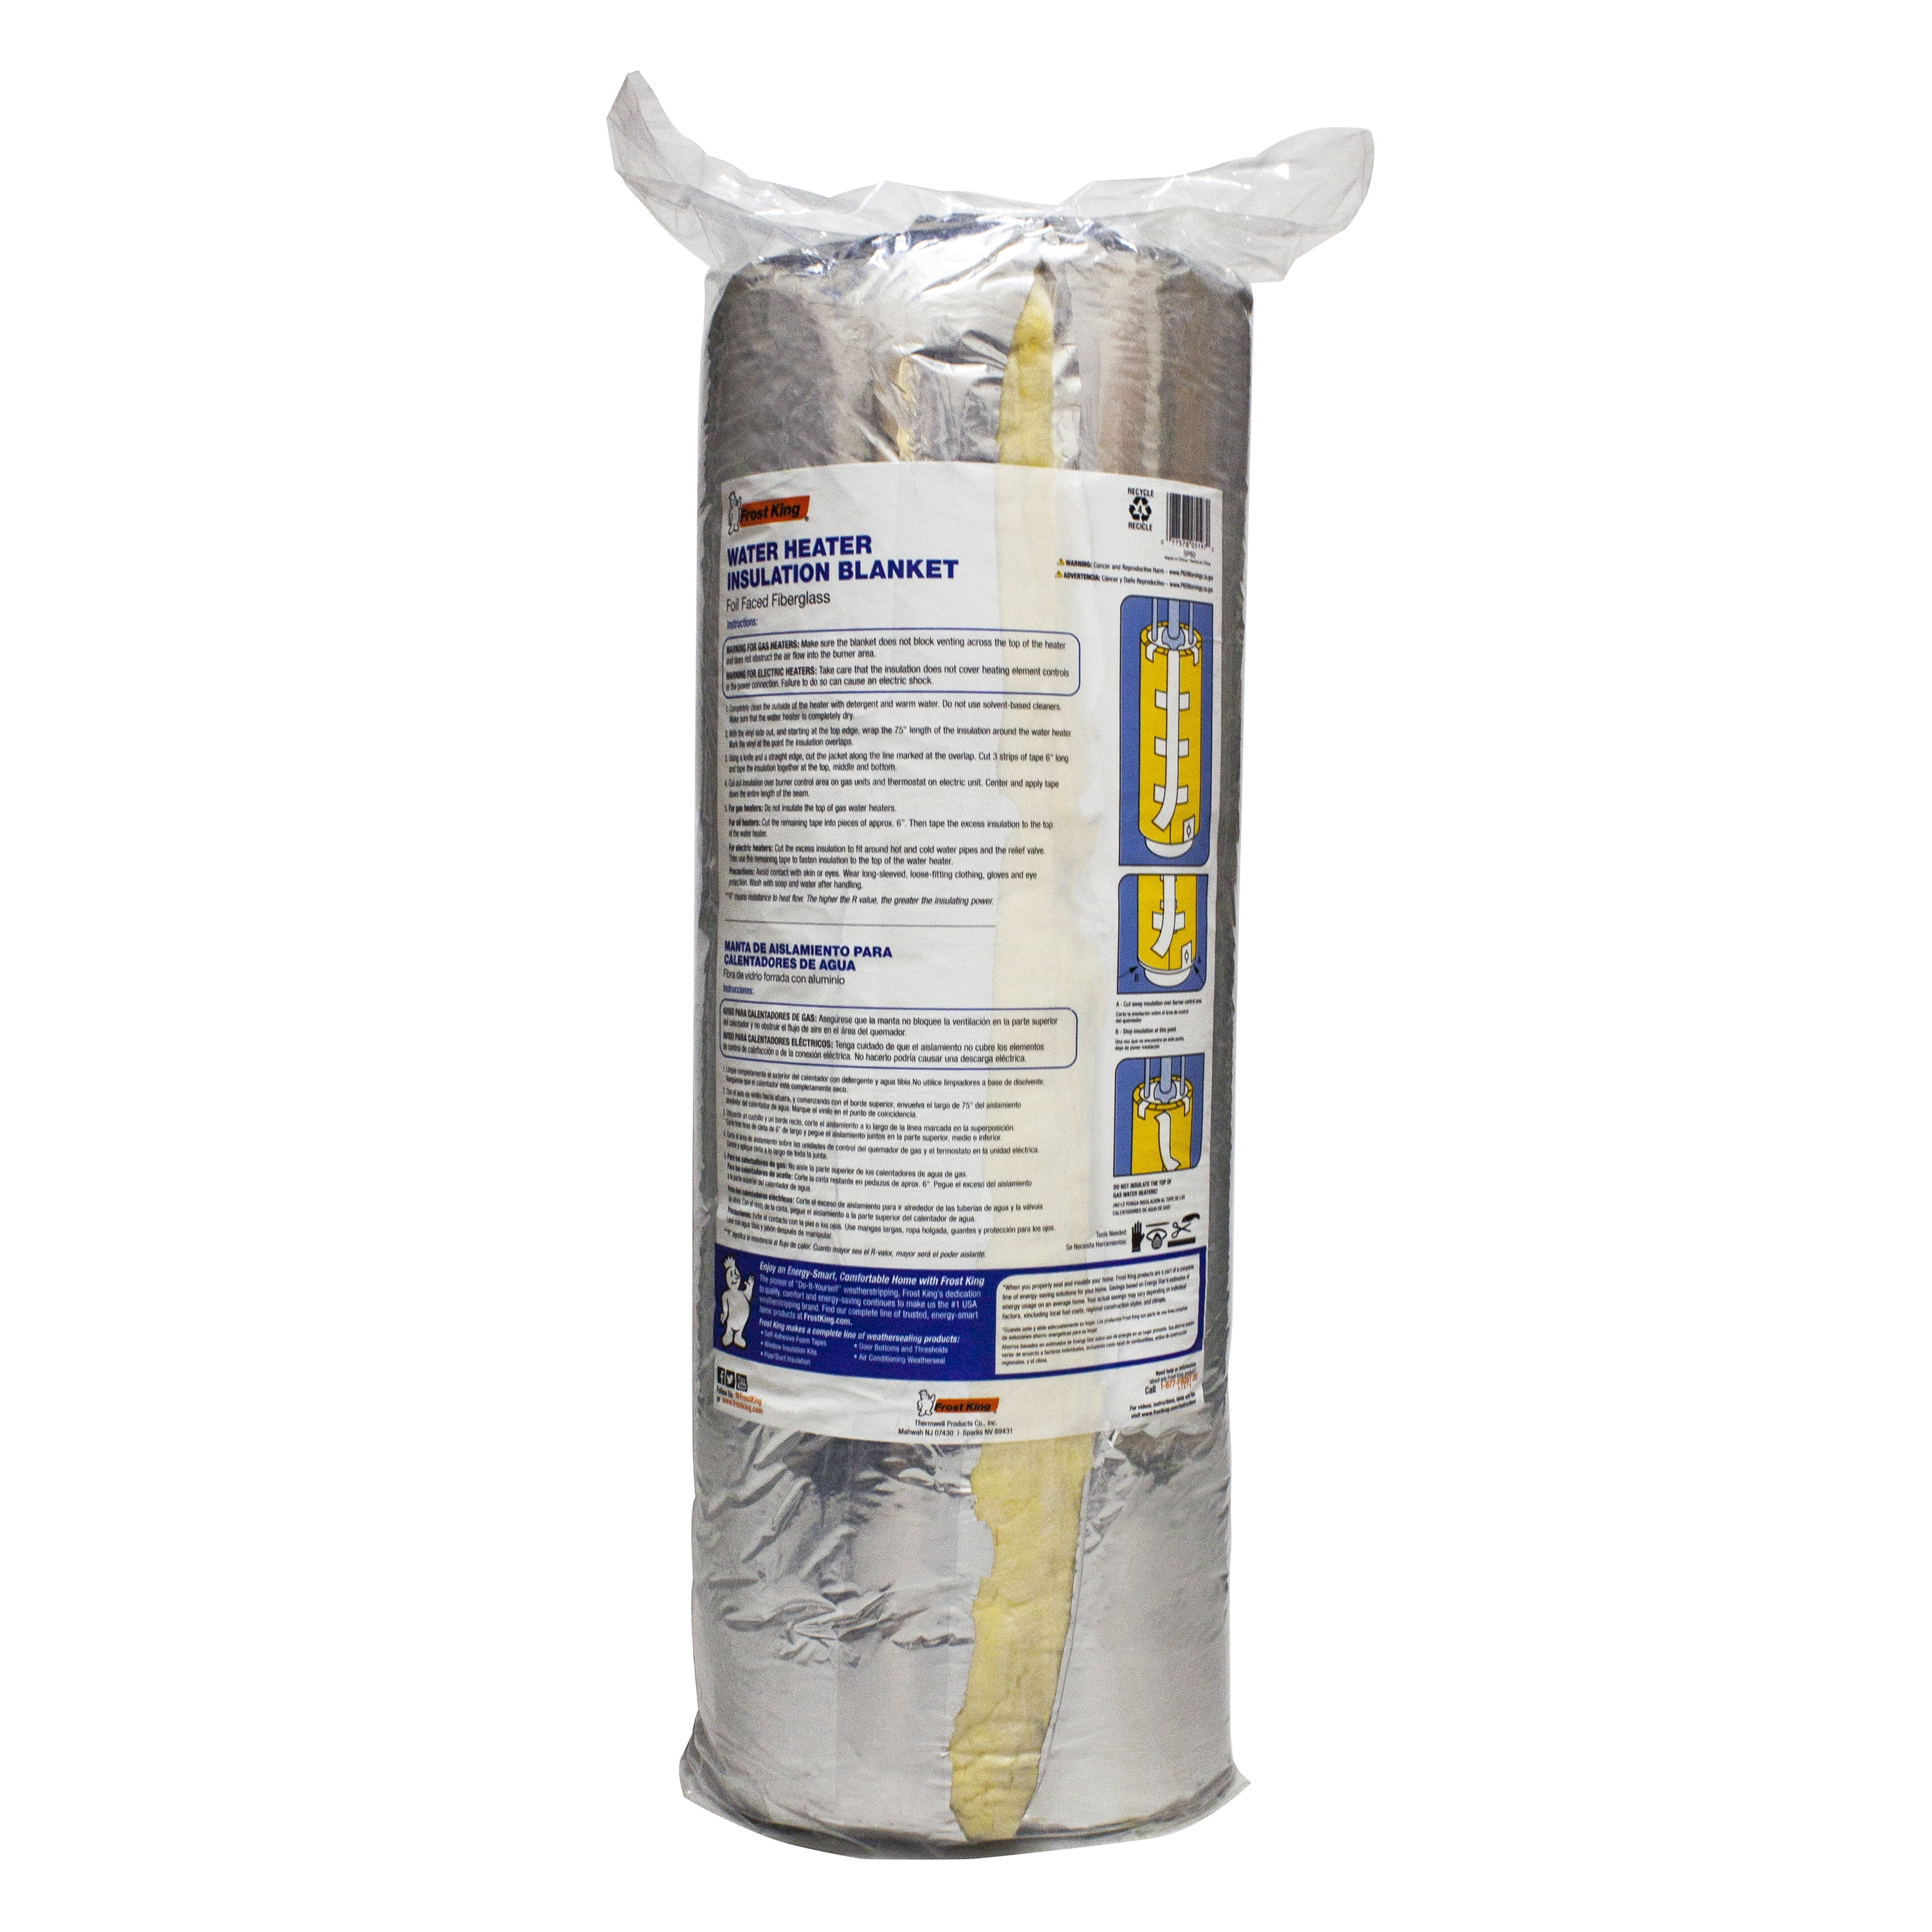 Thermwell Sp57/11c Frost King Water Heater Blanket R10 for sale